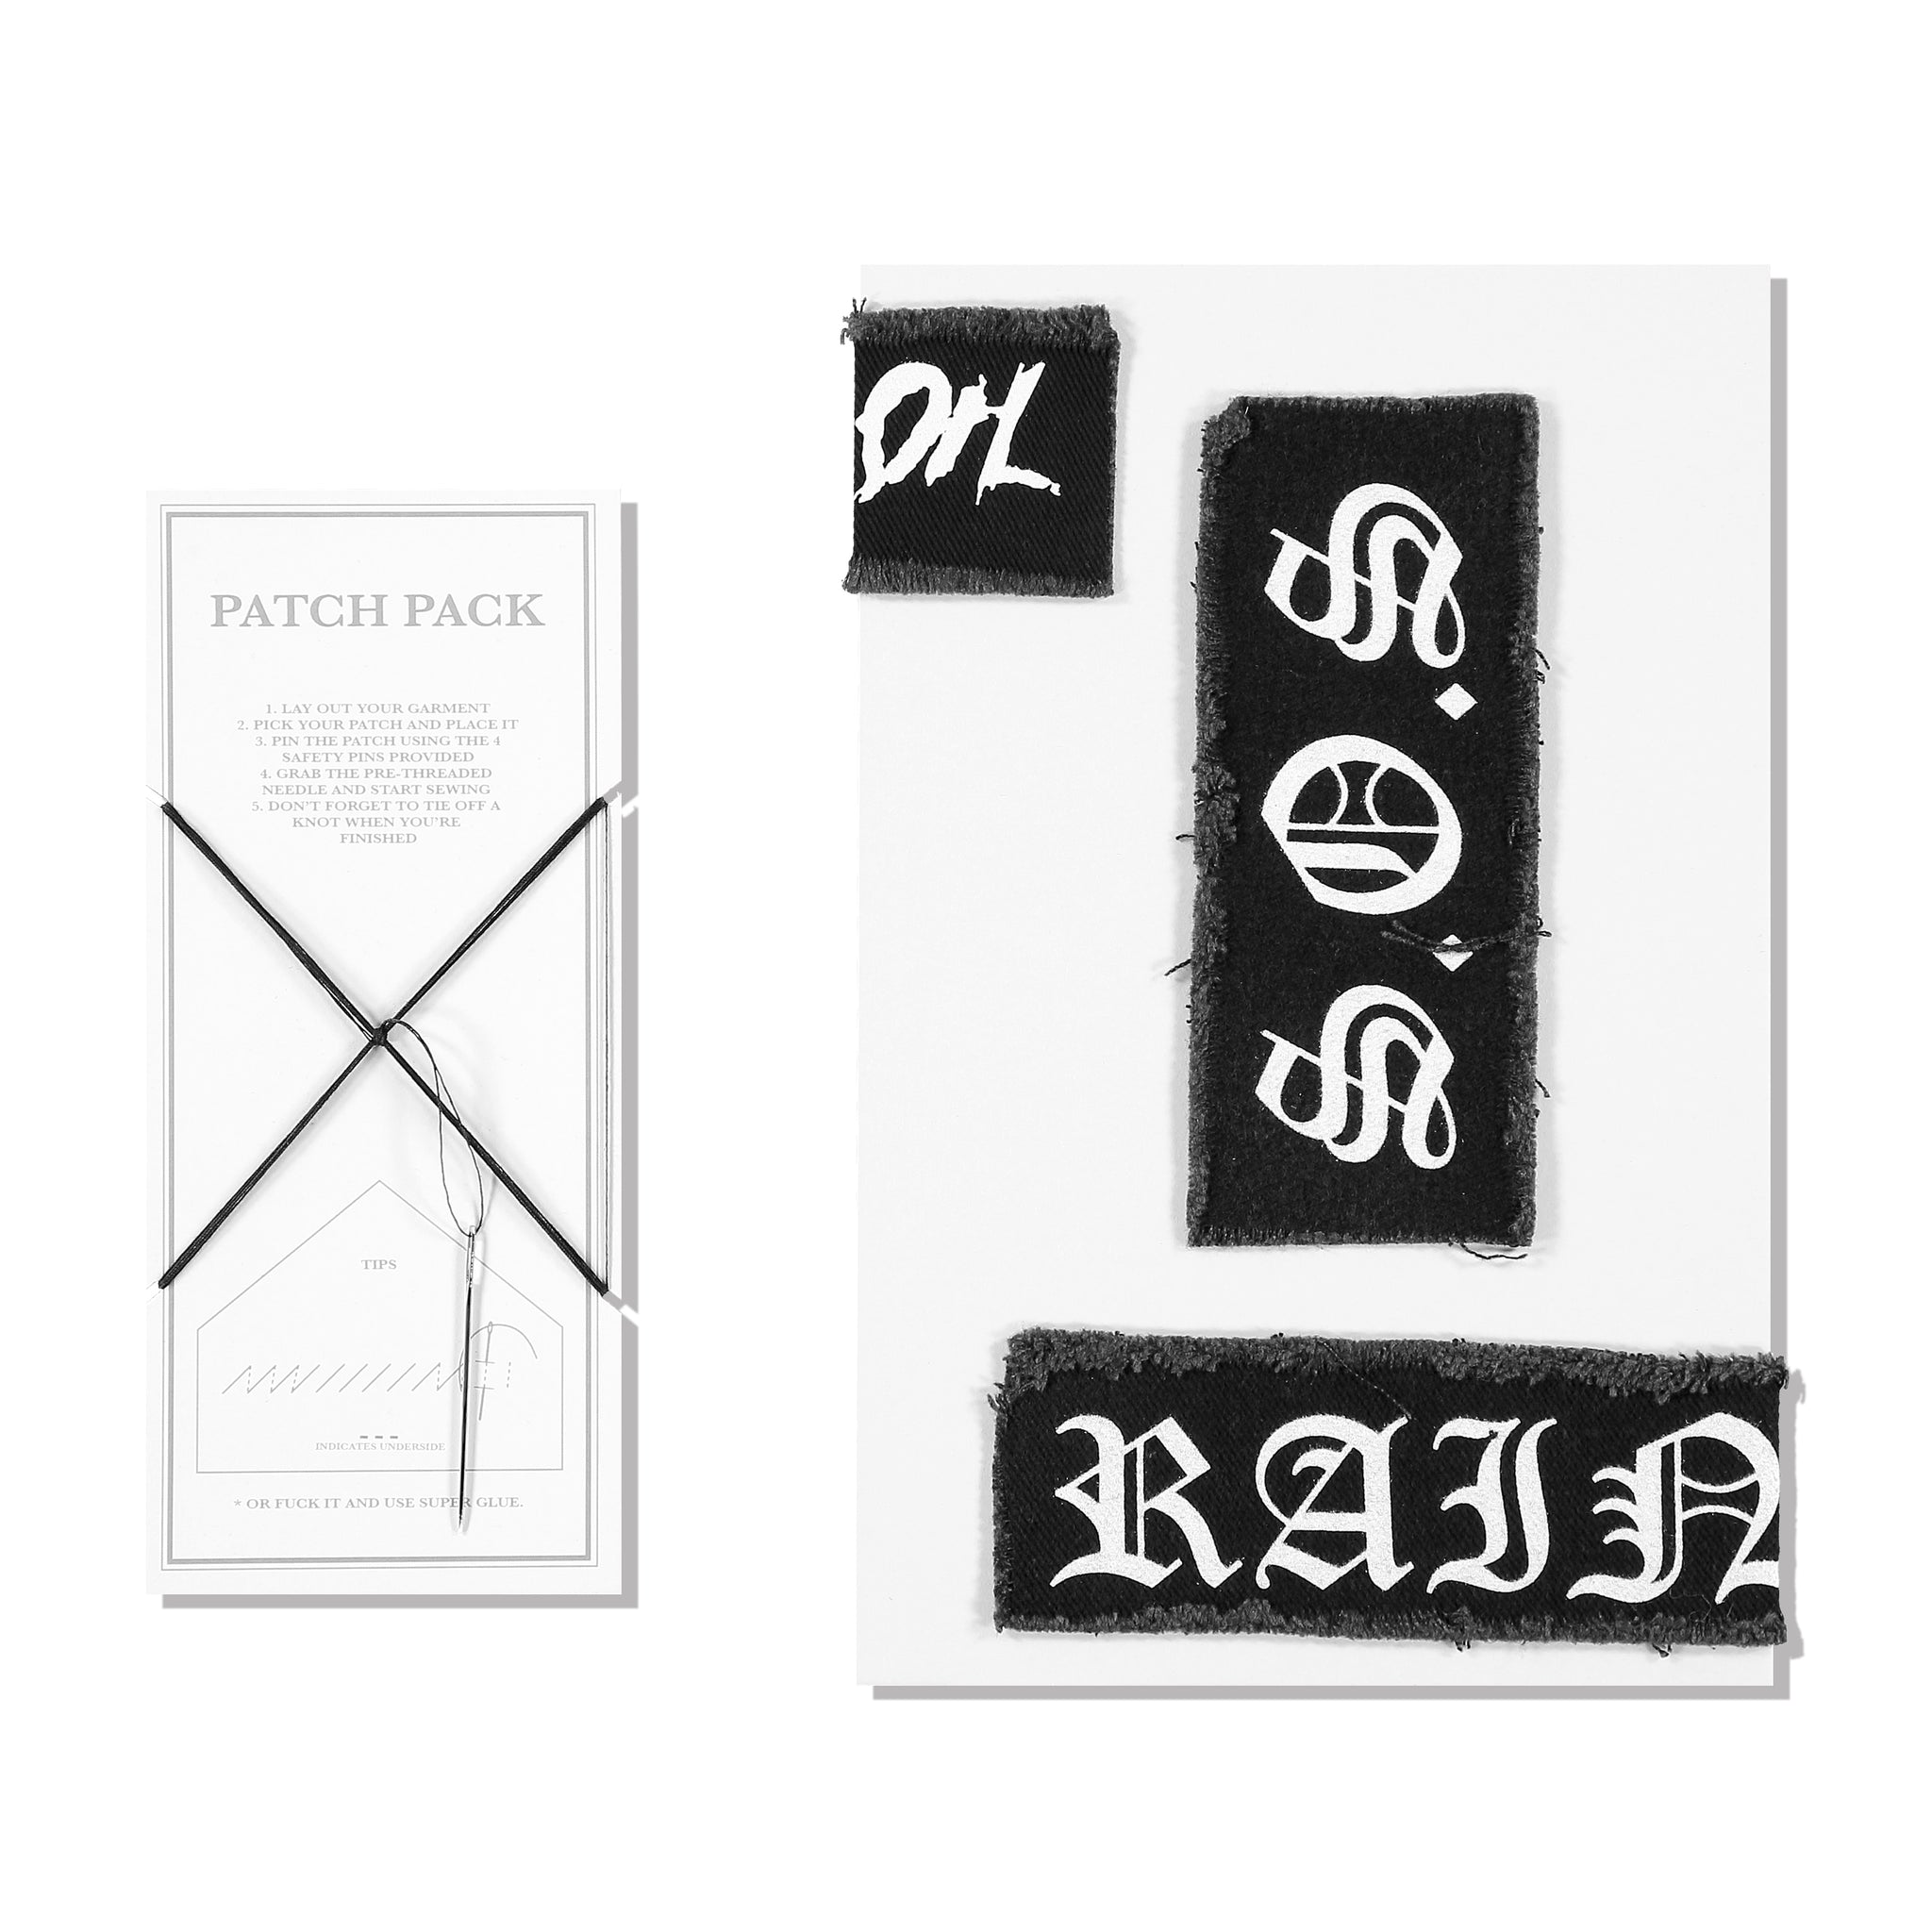 PATCH PACK